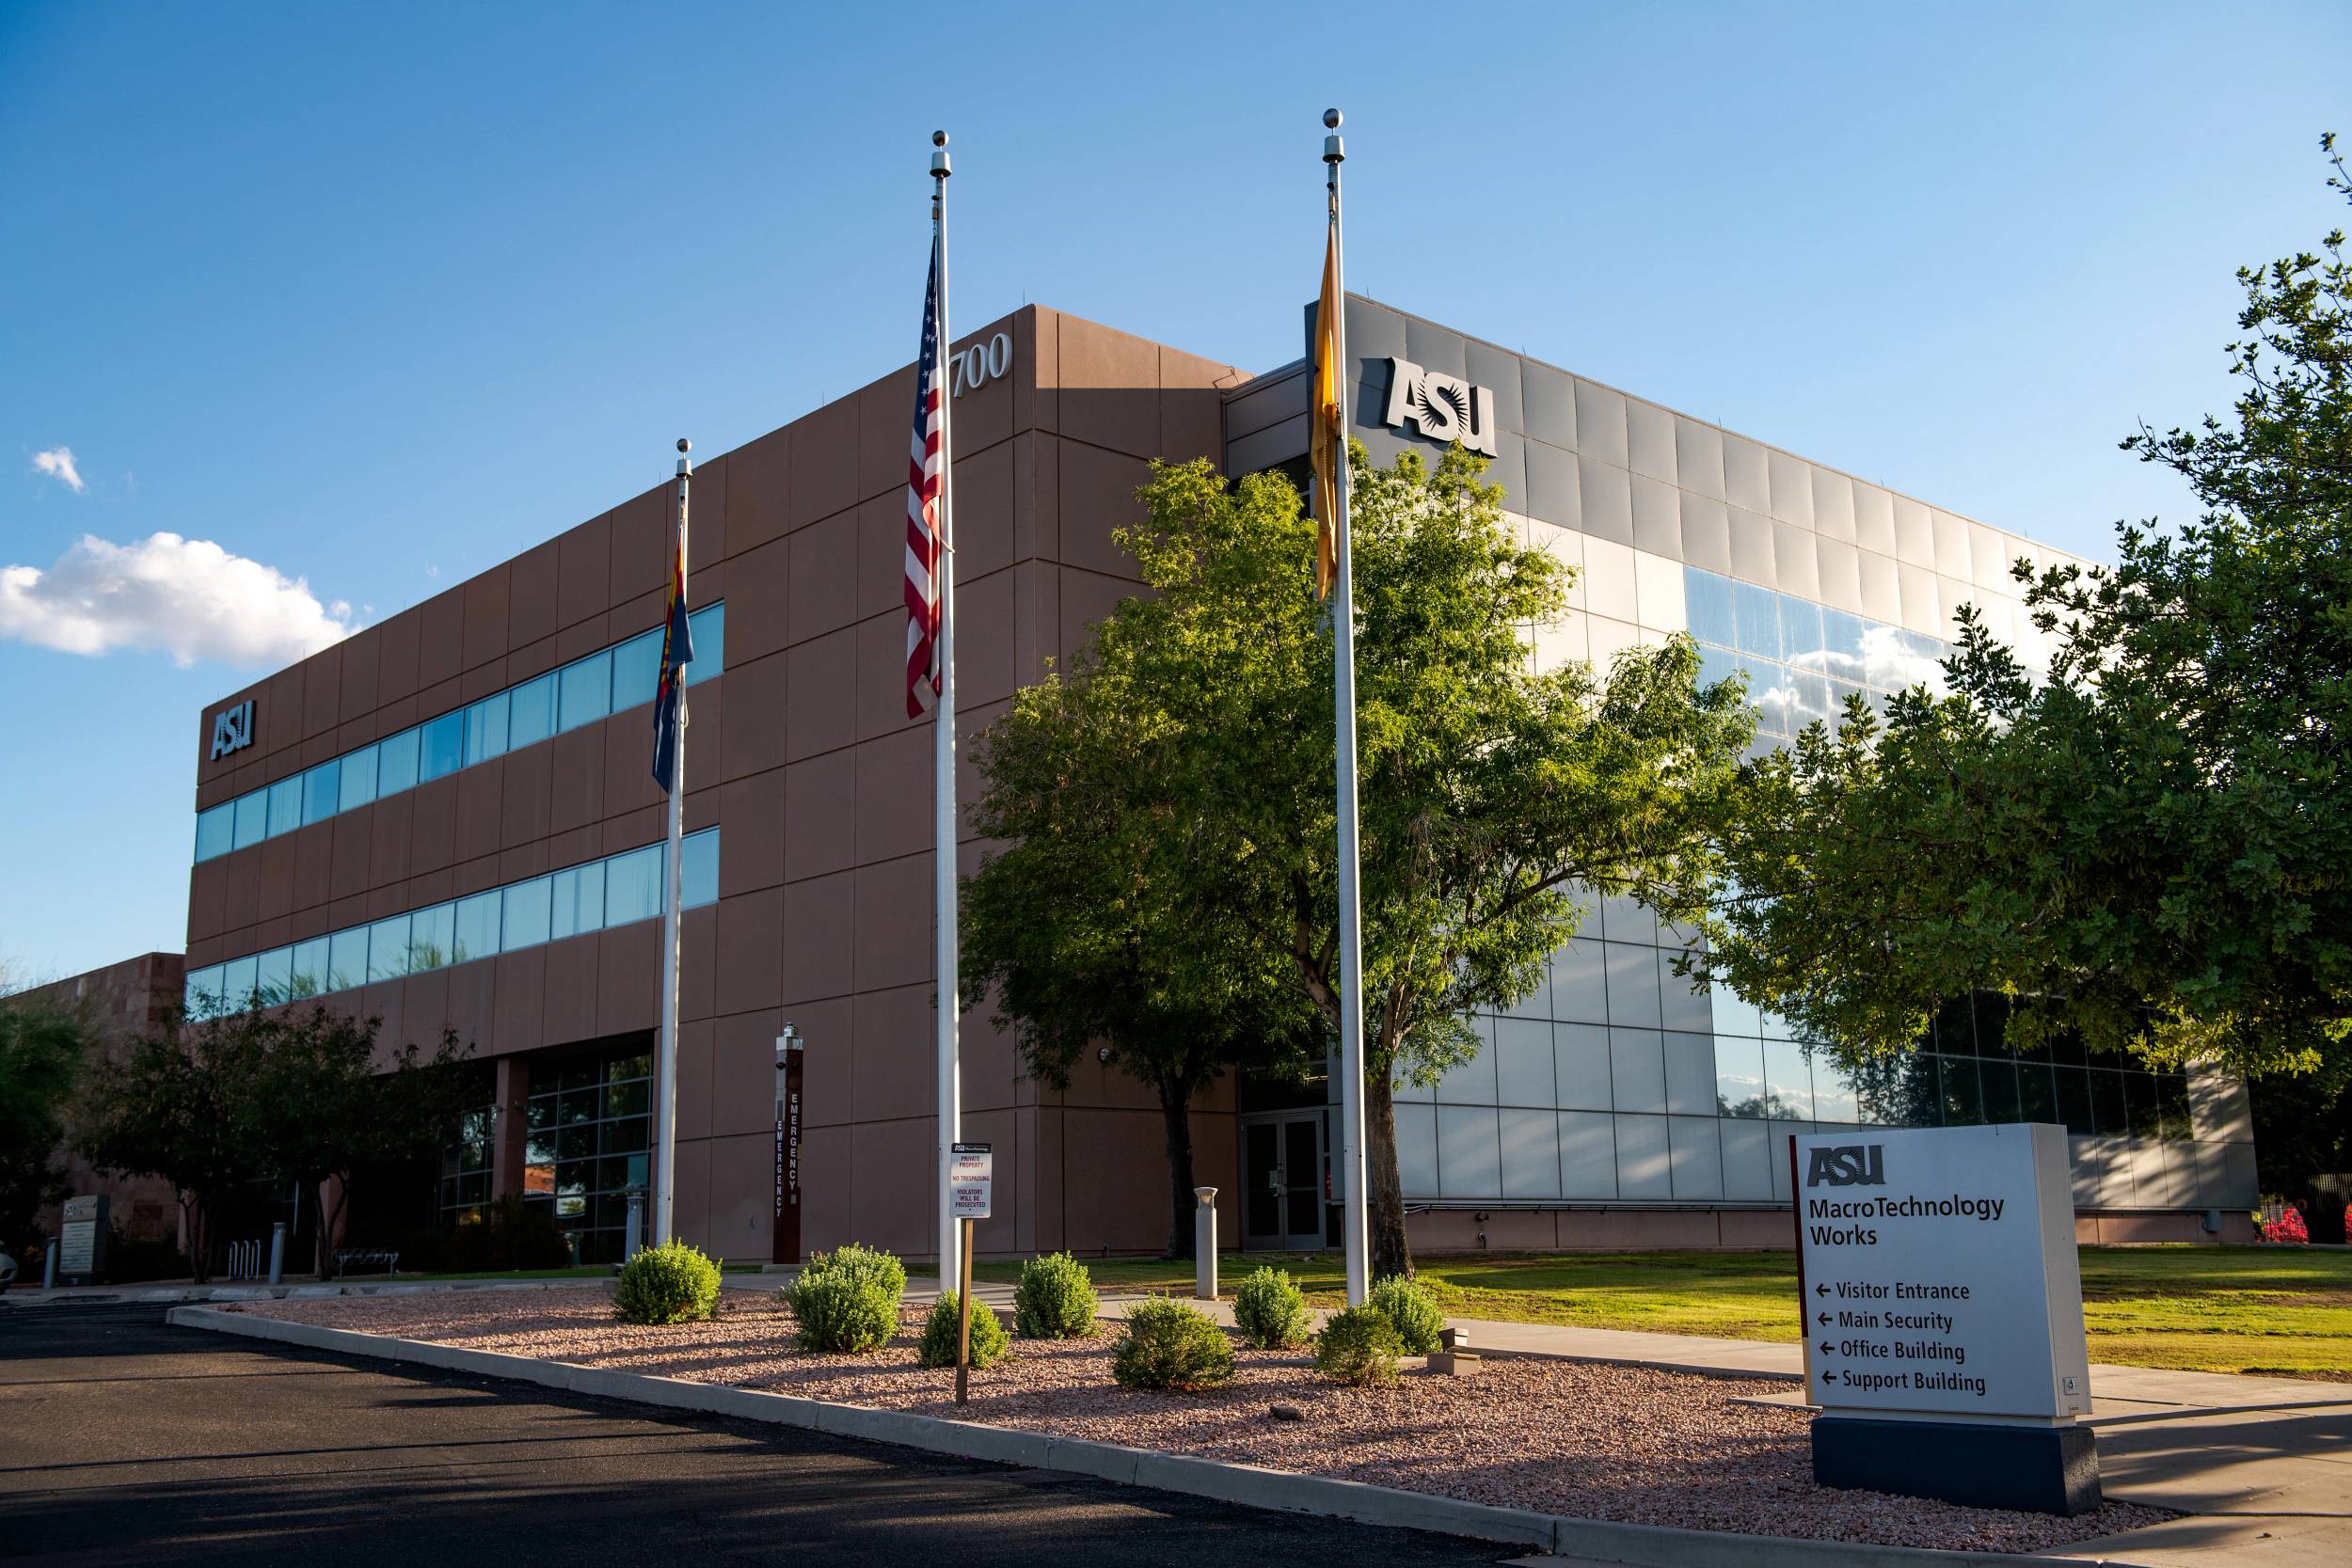 ASU Research Park MacroTechnology Works building